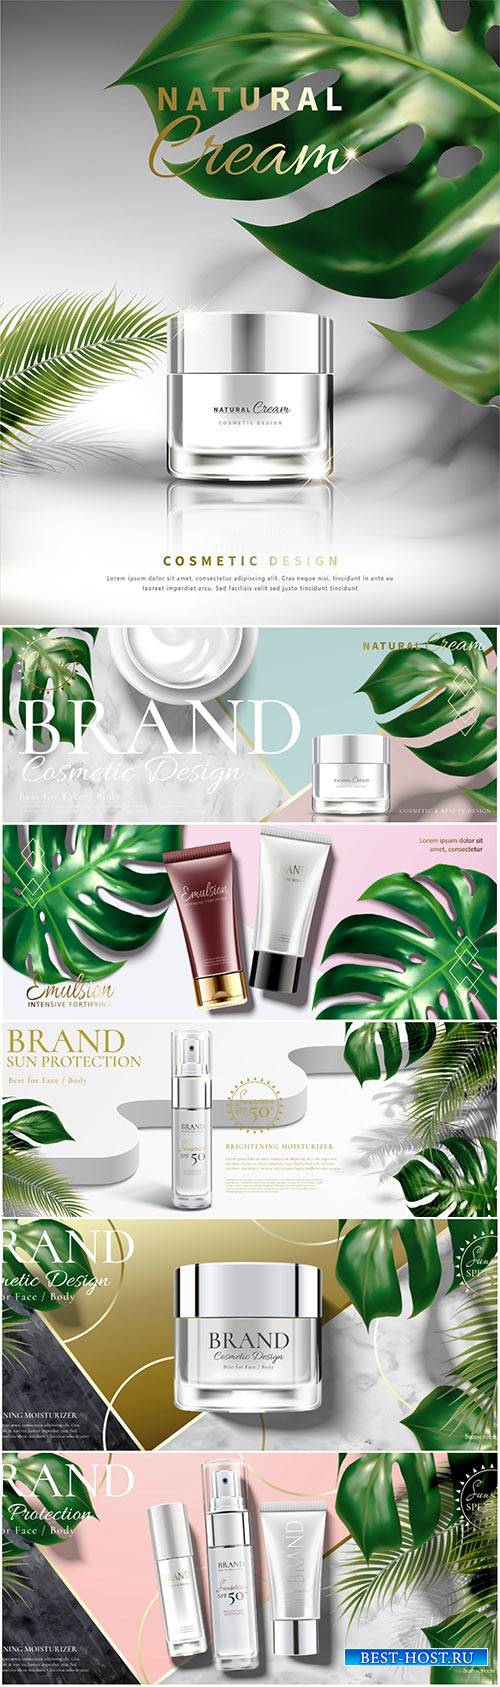 Cosmetic cream jar ads with tropical leaves in 3d illustration